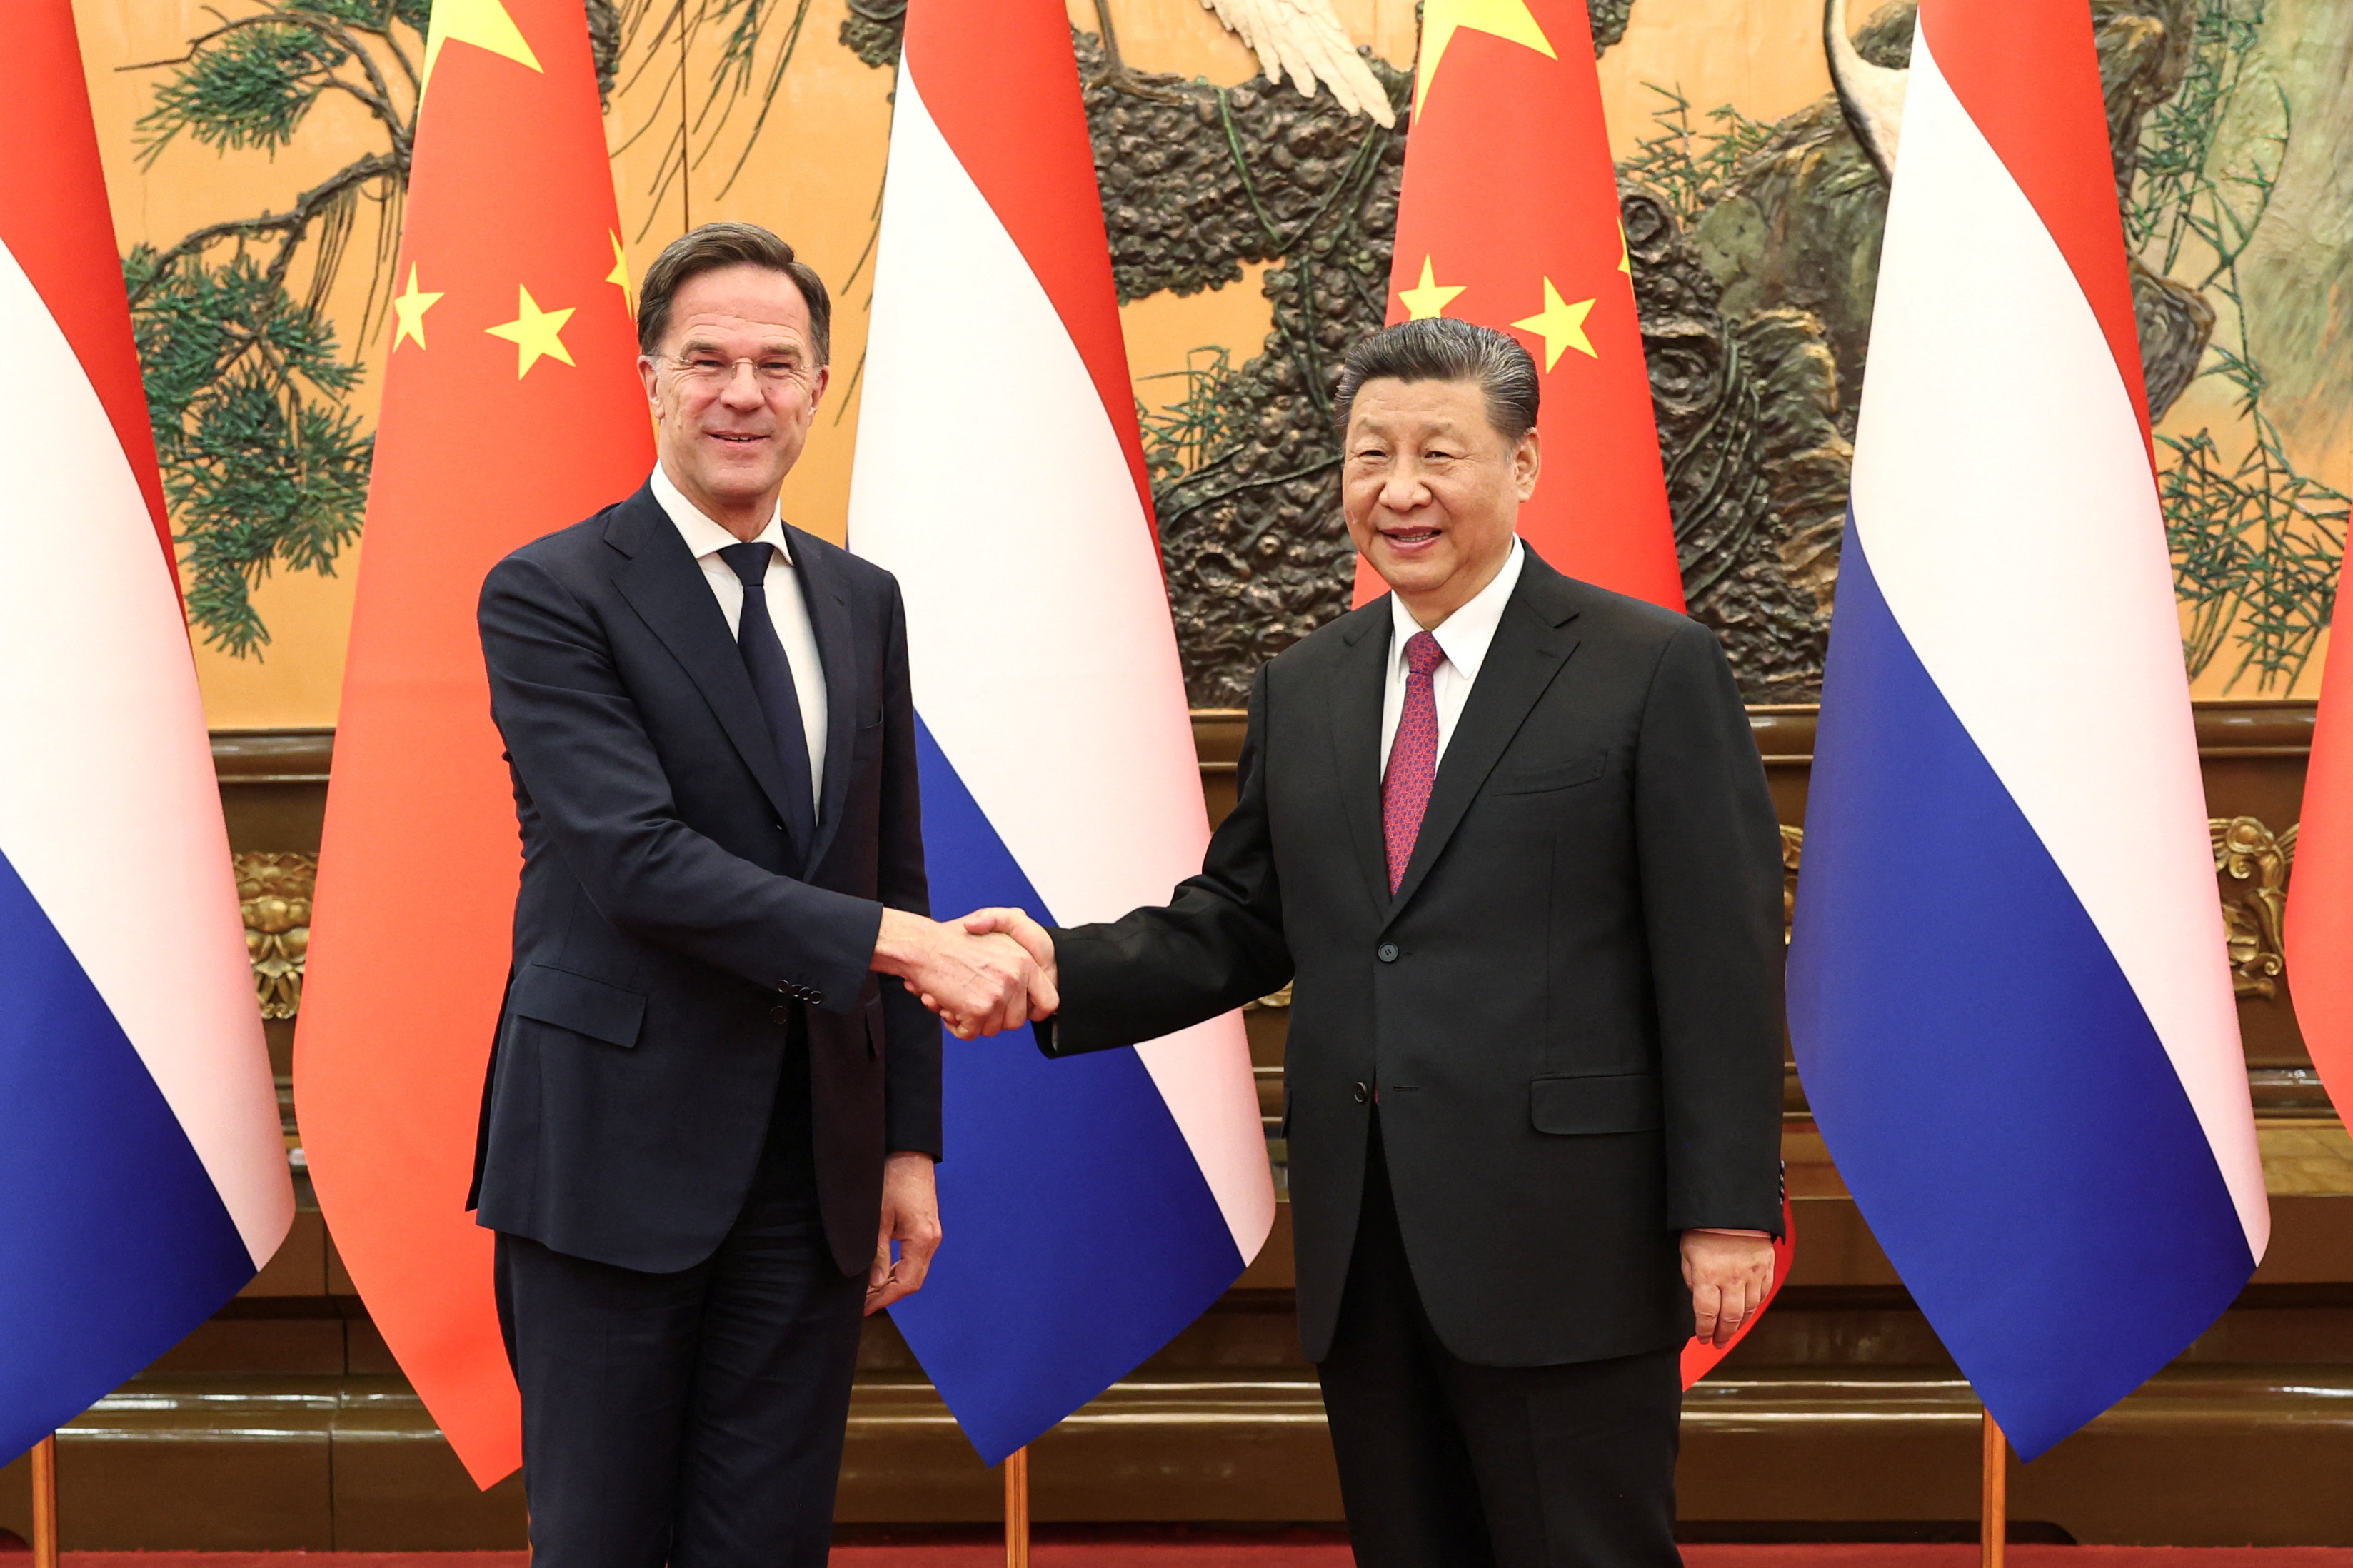 Chinese President Xi Jinping meets Prime Minister of the Netherlands Mark Rutte at the Great Hall of the People in Beijing